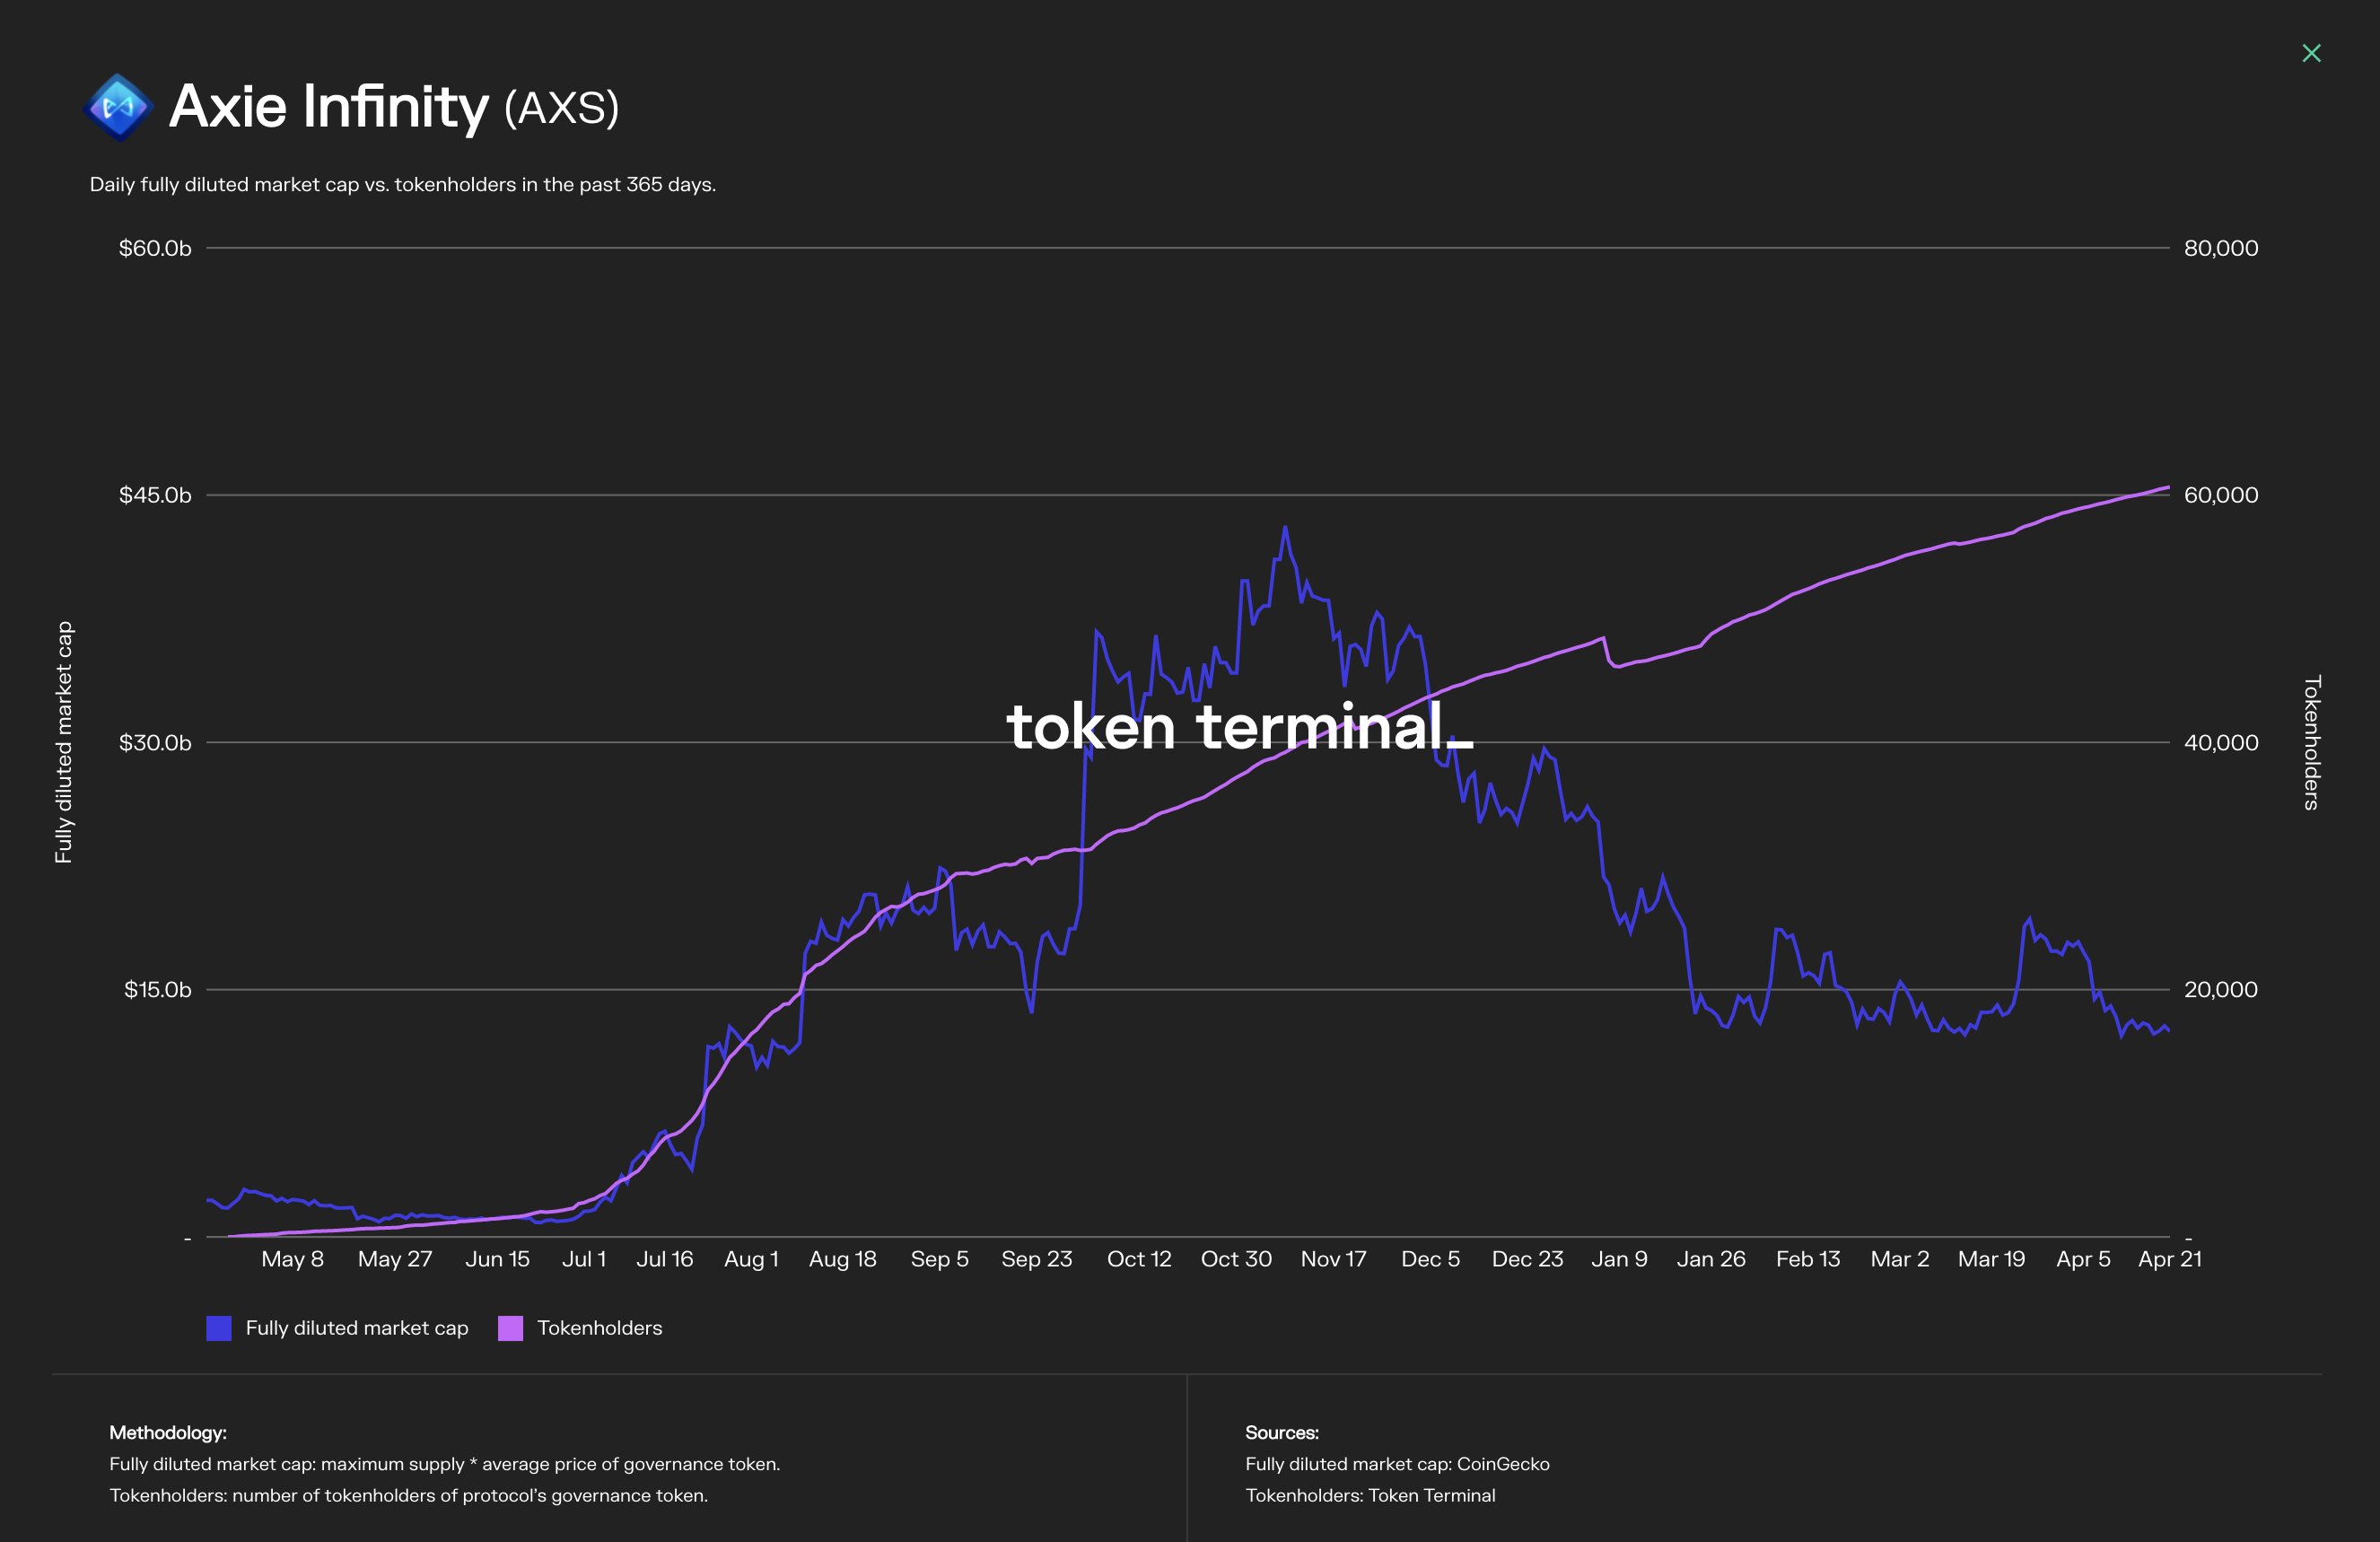 Daily fully diluted market cap vs. token holders over the past year